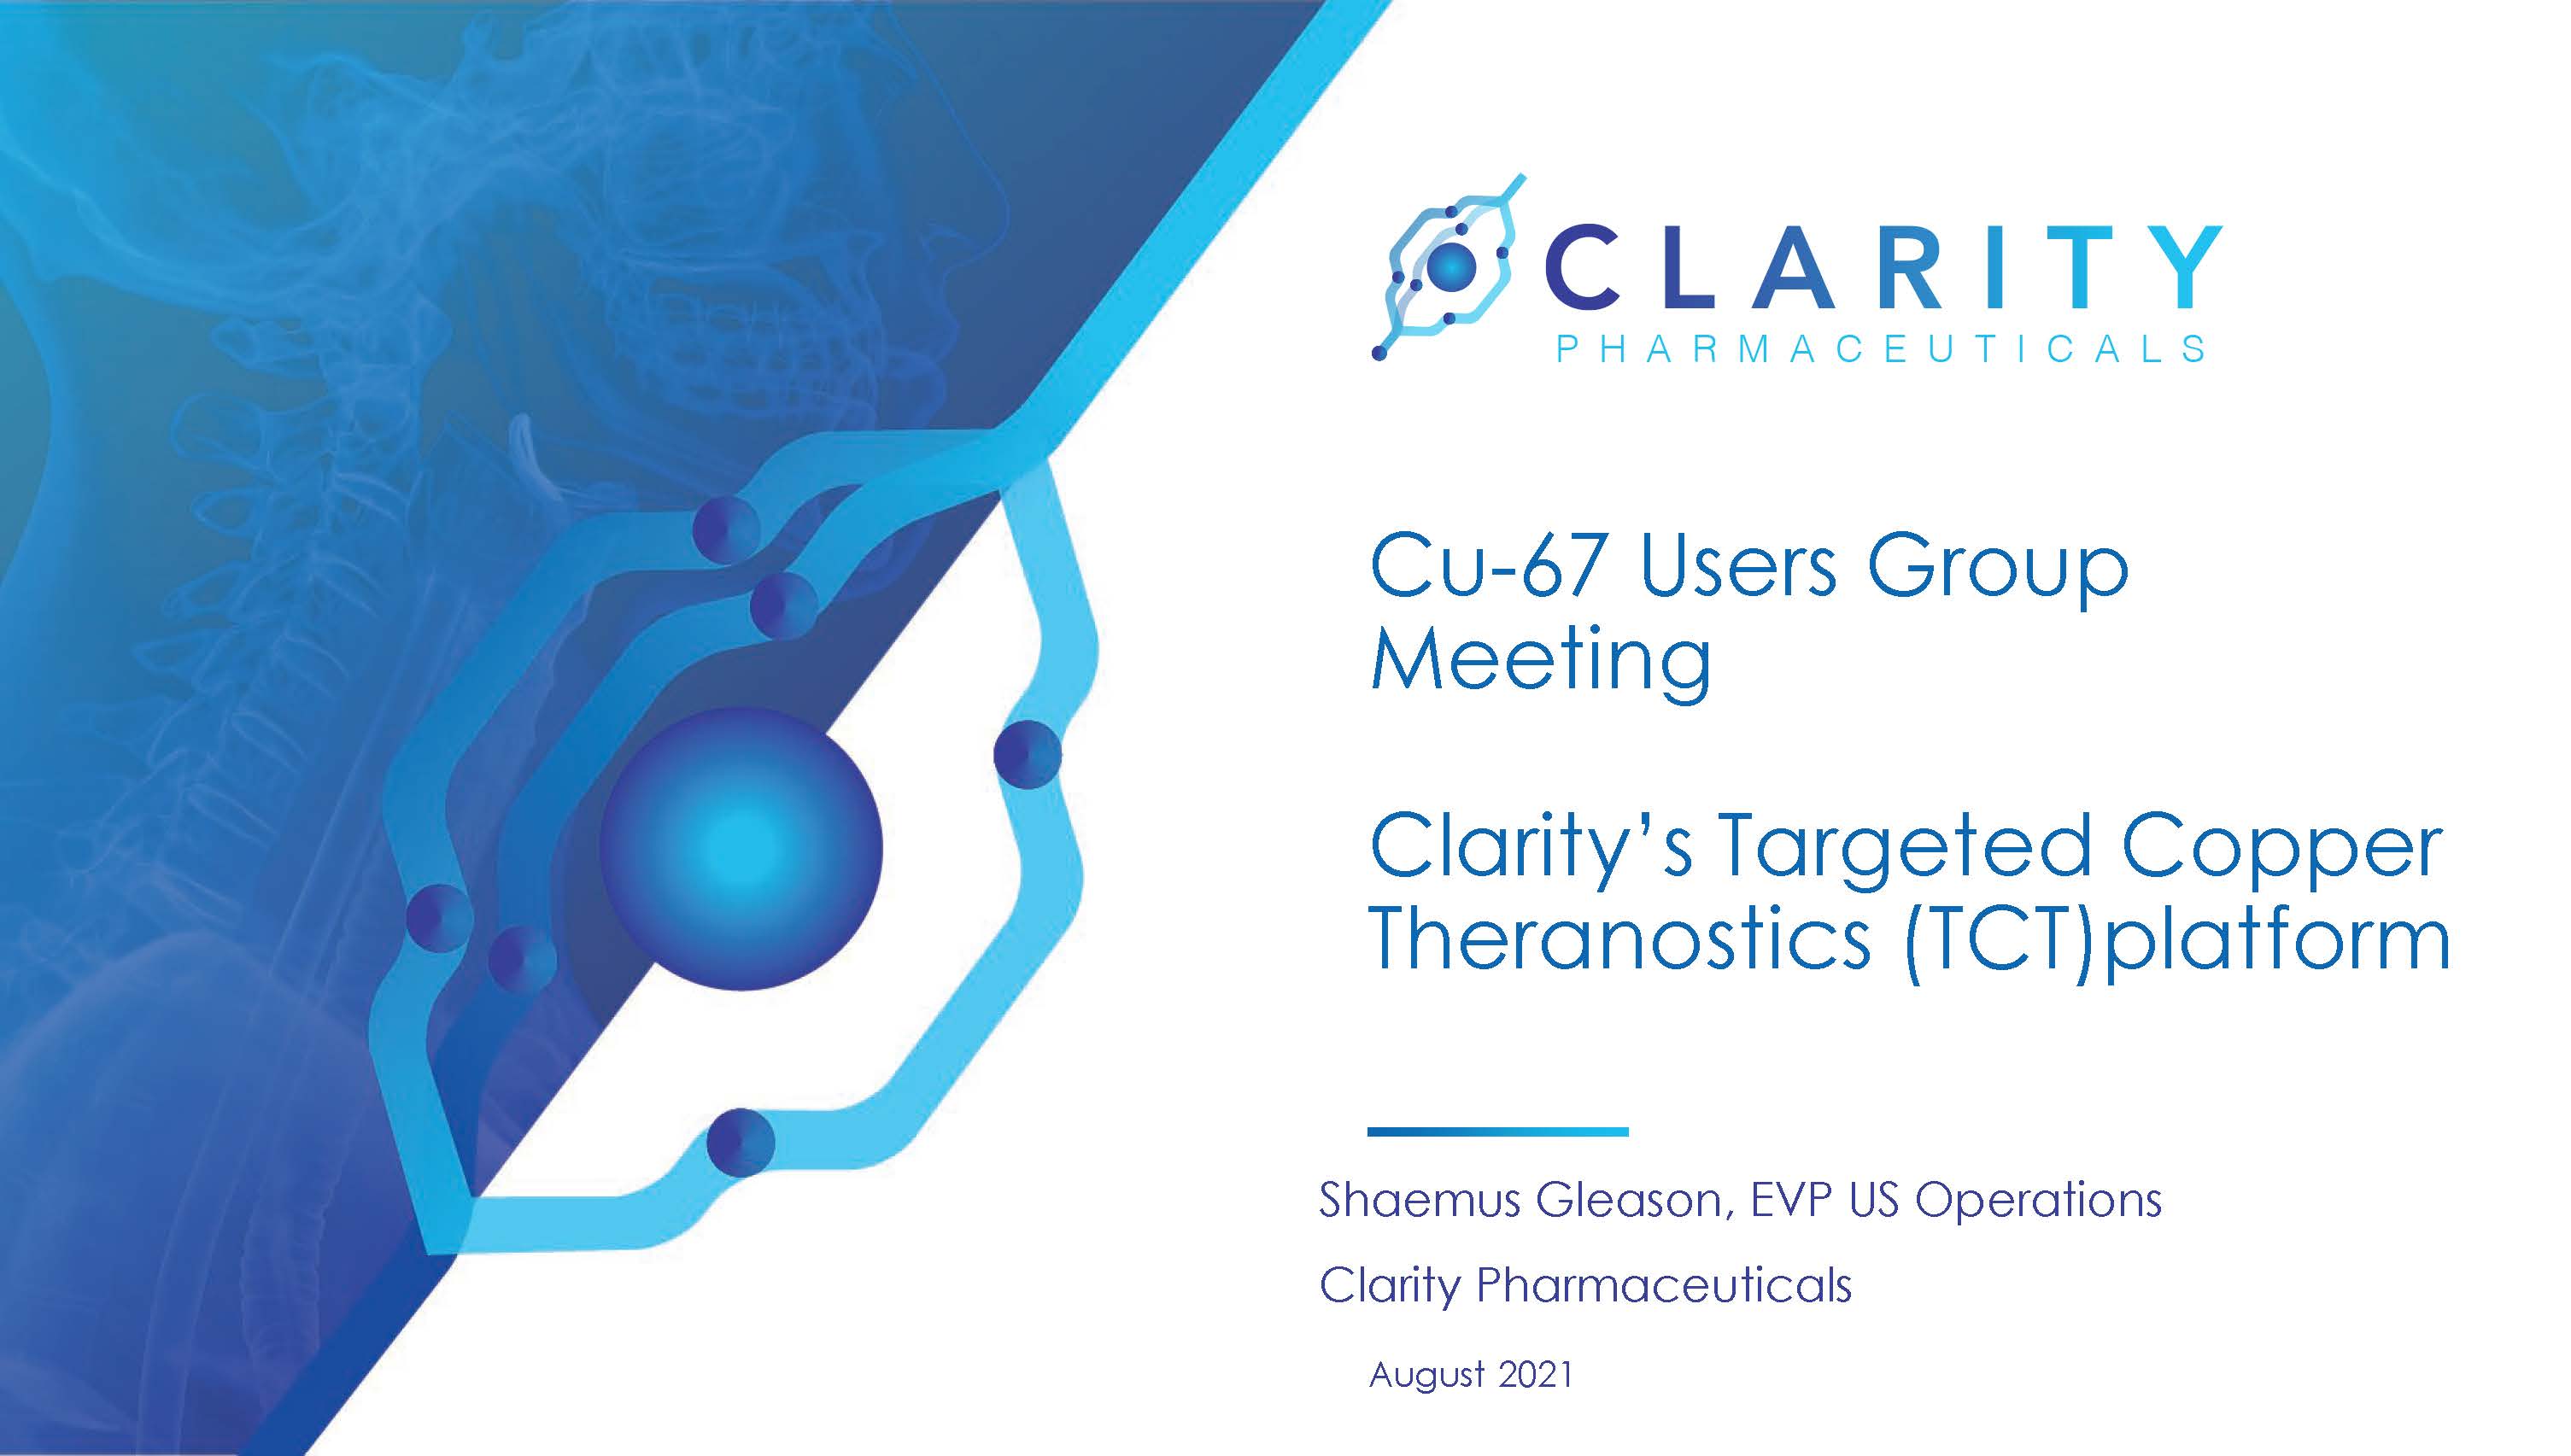 Clarity's Targeted Copper Theranostics (TCT) Platform by Mr. Shaemus Gleason, Clarity Pharmaceuticals